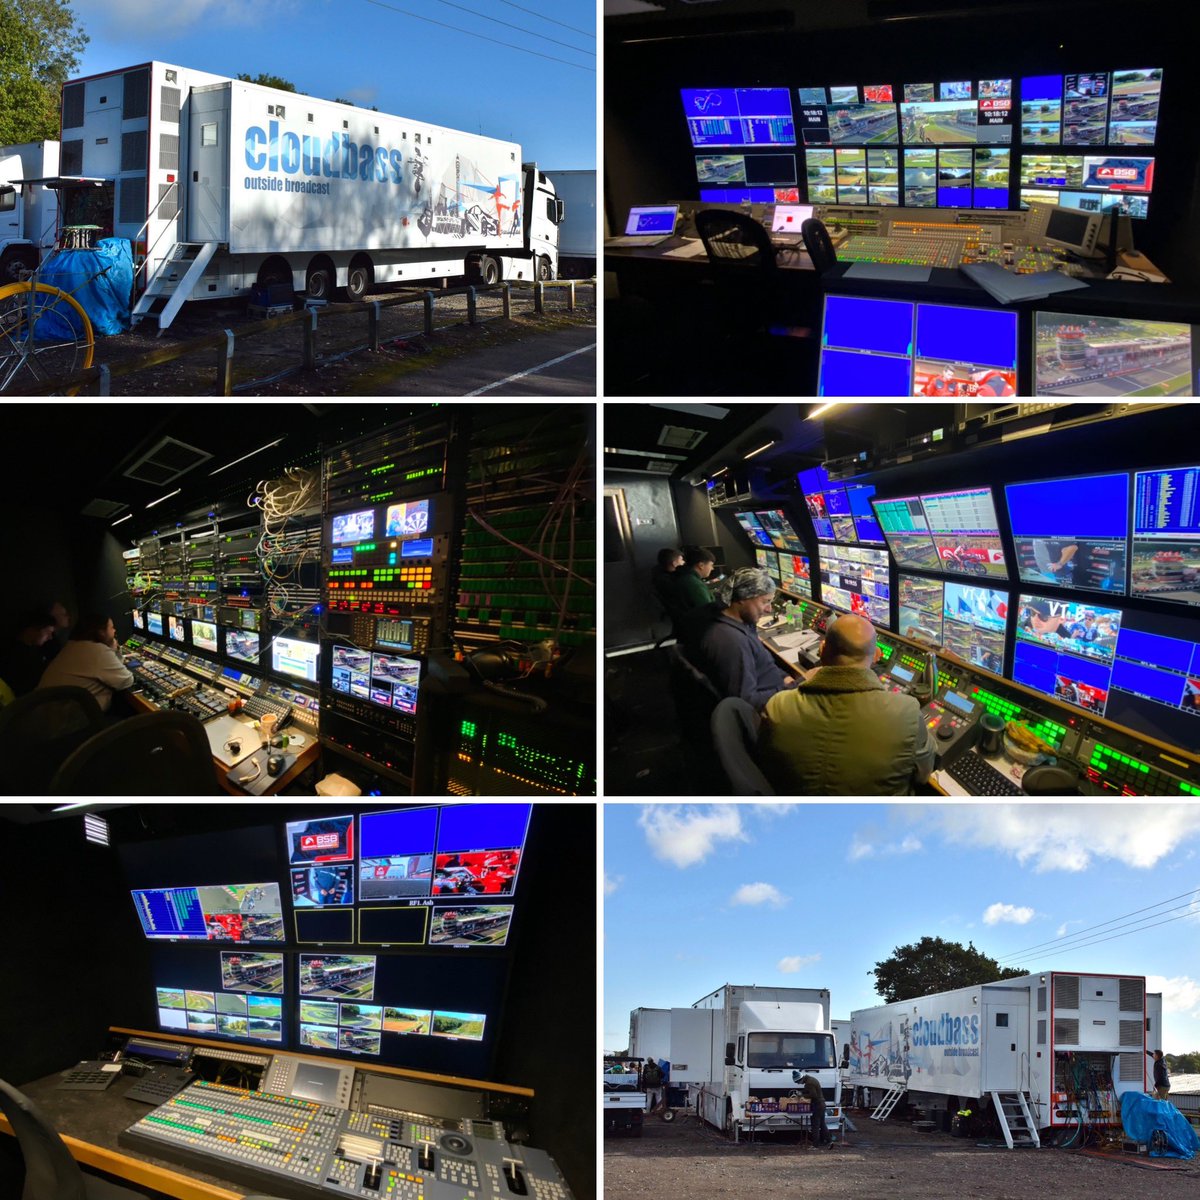 Final rounds of the British Superbike Championship at Brands Hatch - @cloudbass OB team covering the action for Eurosport Tommy Bridewell winning the Championship in the final race by the narrowest 0.5 point margin #outsidebroadcast #Cloudbass #BSB @OfficialBSB @Brands_Hatch